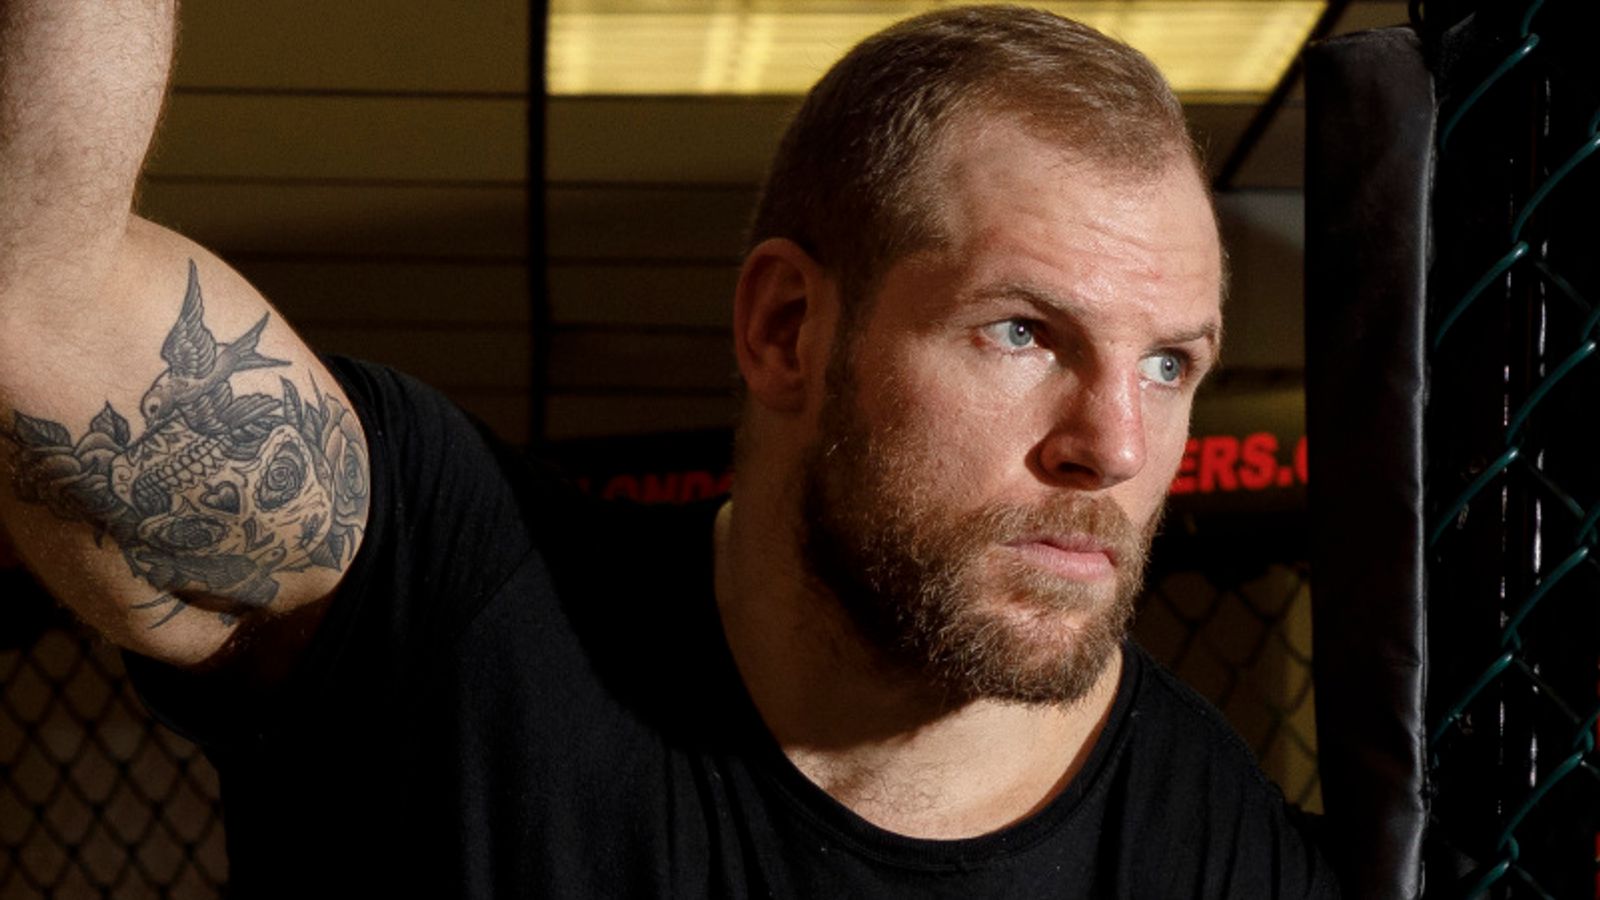 James Haskell apologises for 'disrespecting women's game' after social media comment to Bristol's Simi Pam